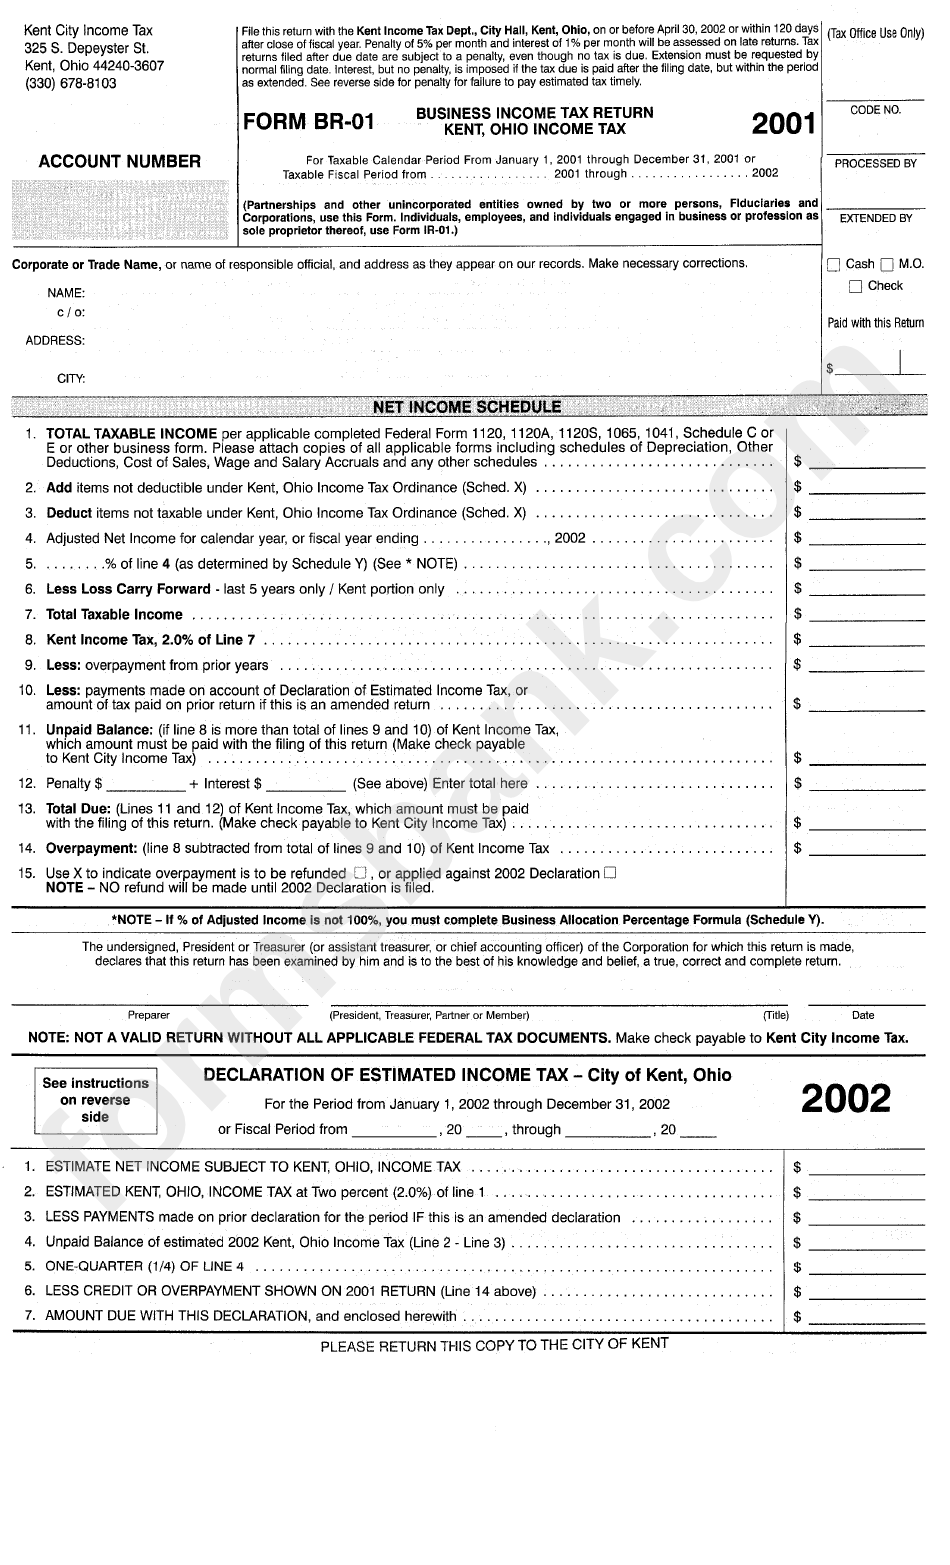 Form Br-01 - Business Income Tax Reurn Forn